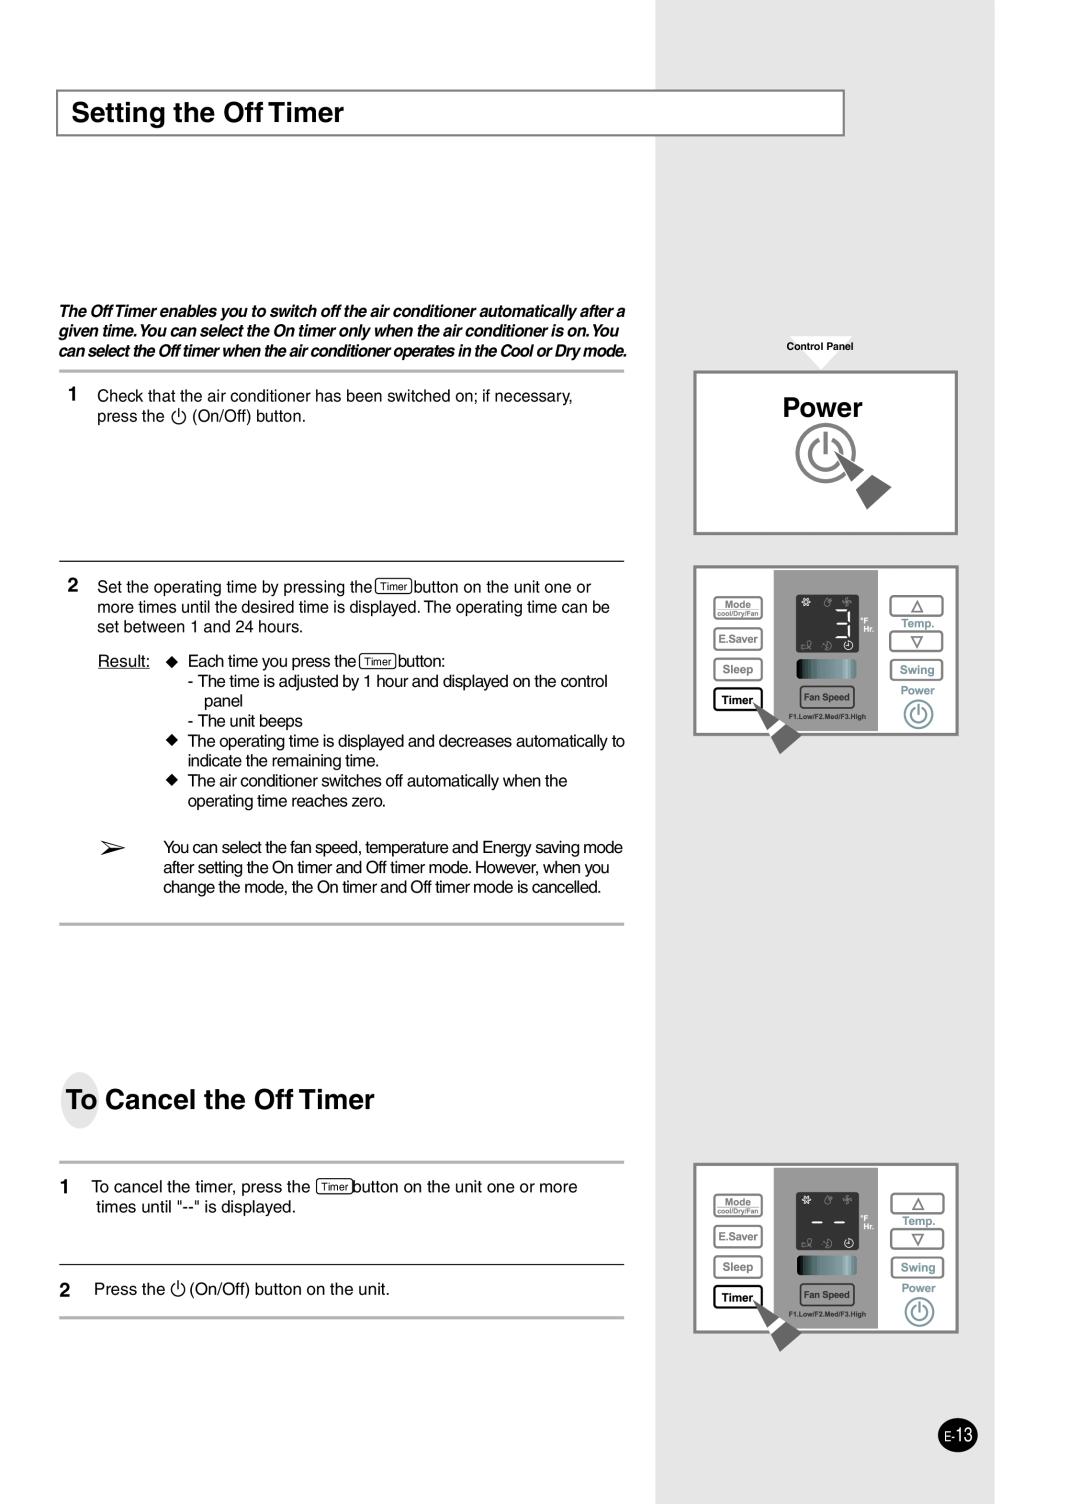 Samsung AW2492L manual Setting the Off Timer, To Cancel the Off Timer, Power 